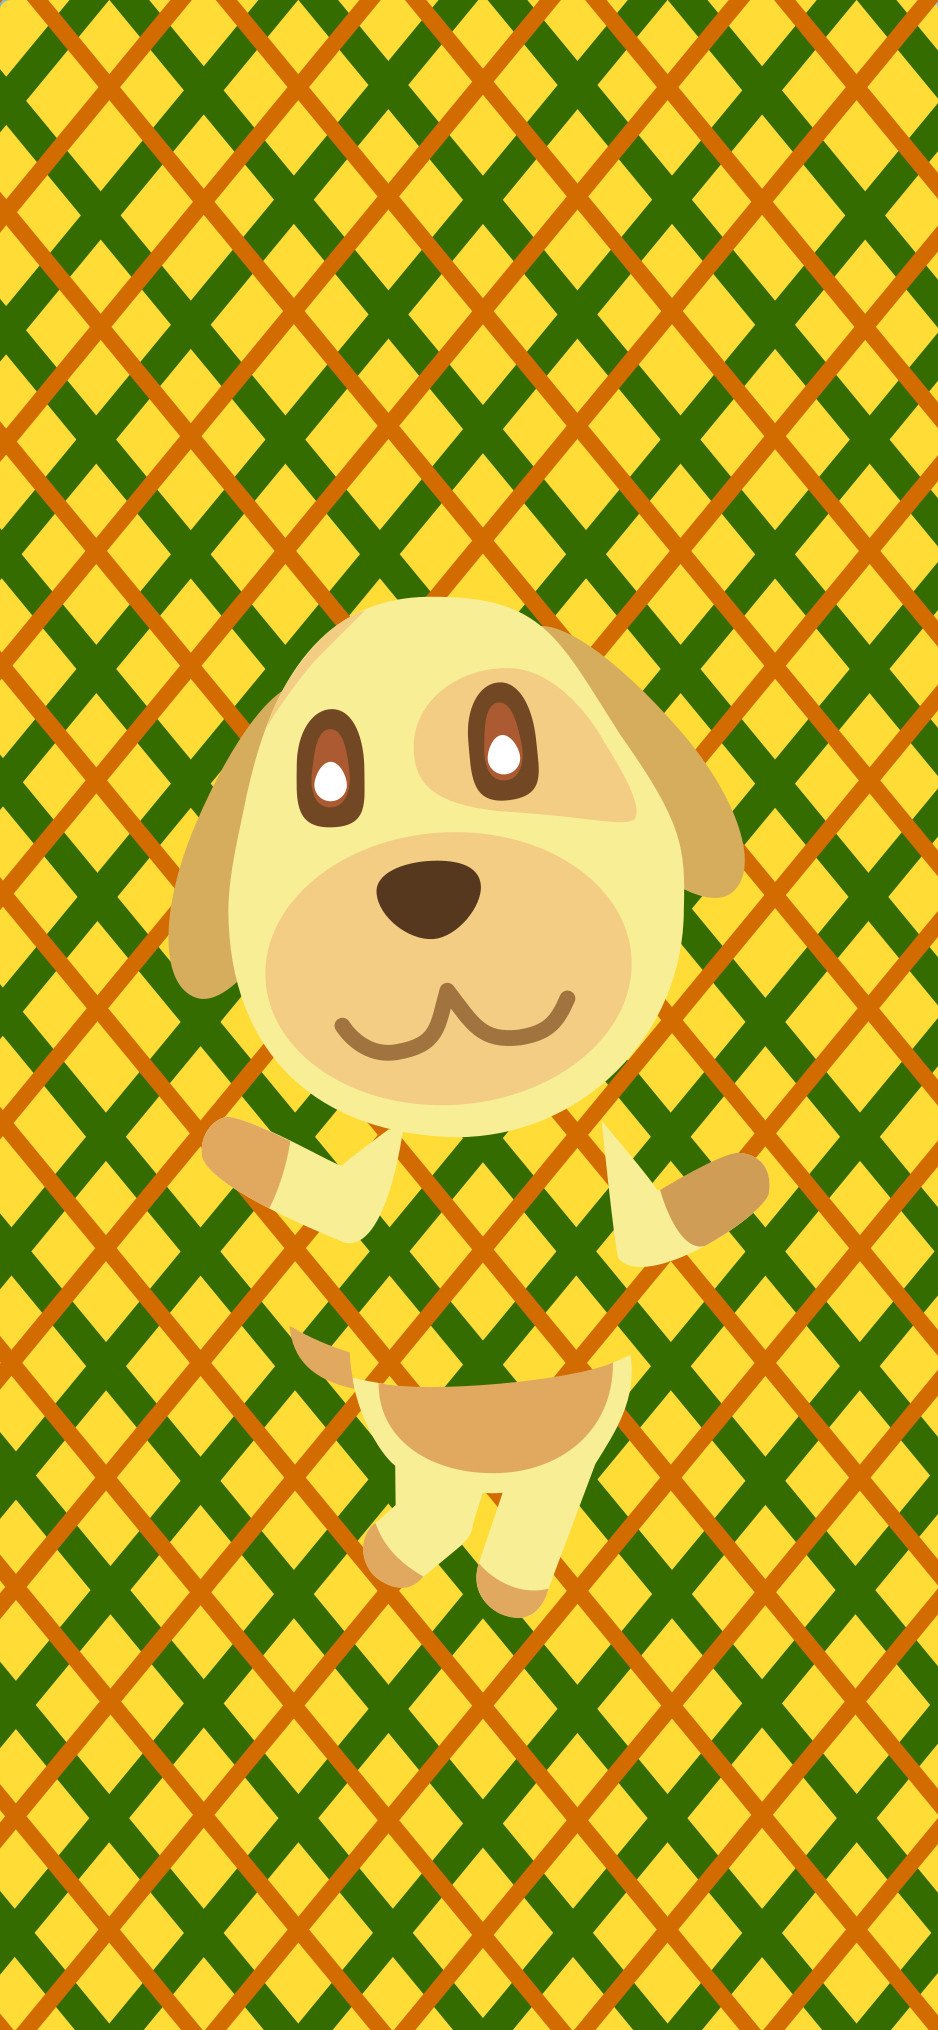 Goldie wallpaper I made, It has the dimension for the iPhone X but you can adjust it to other phones: AnimalCrossing